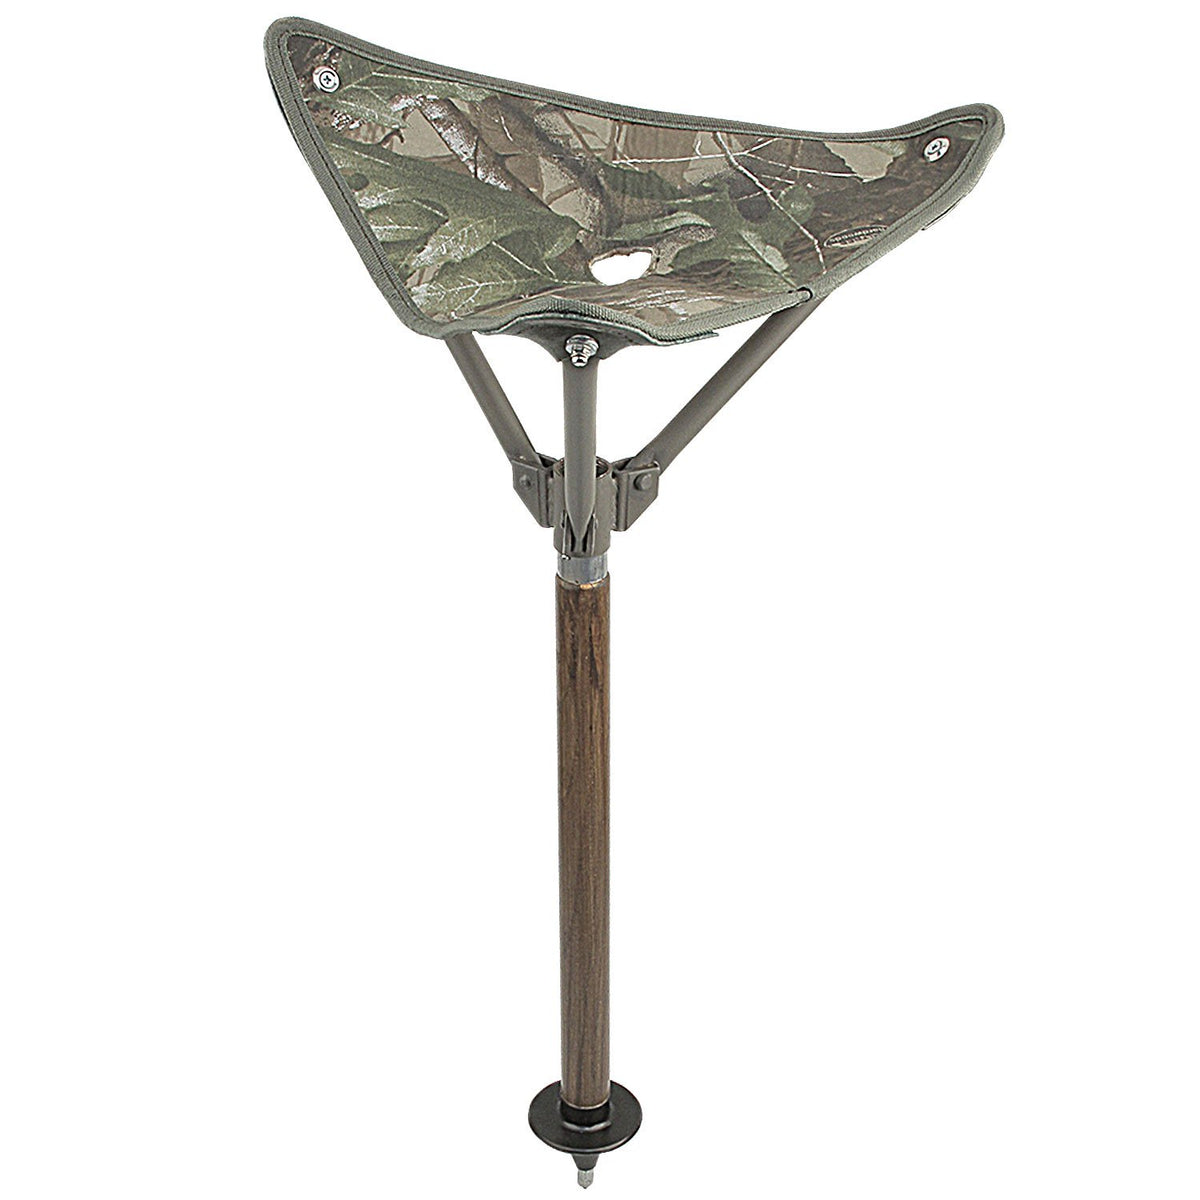 Practical Compact Tripod Seat With RealTree Camo